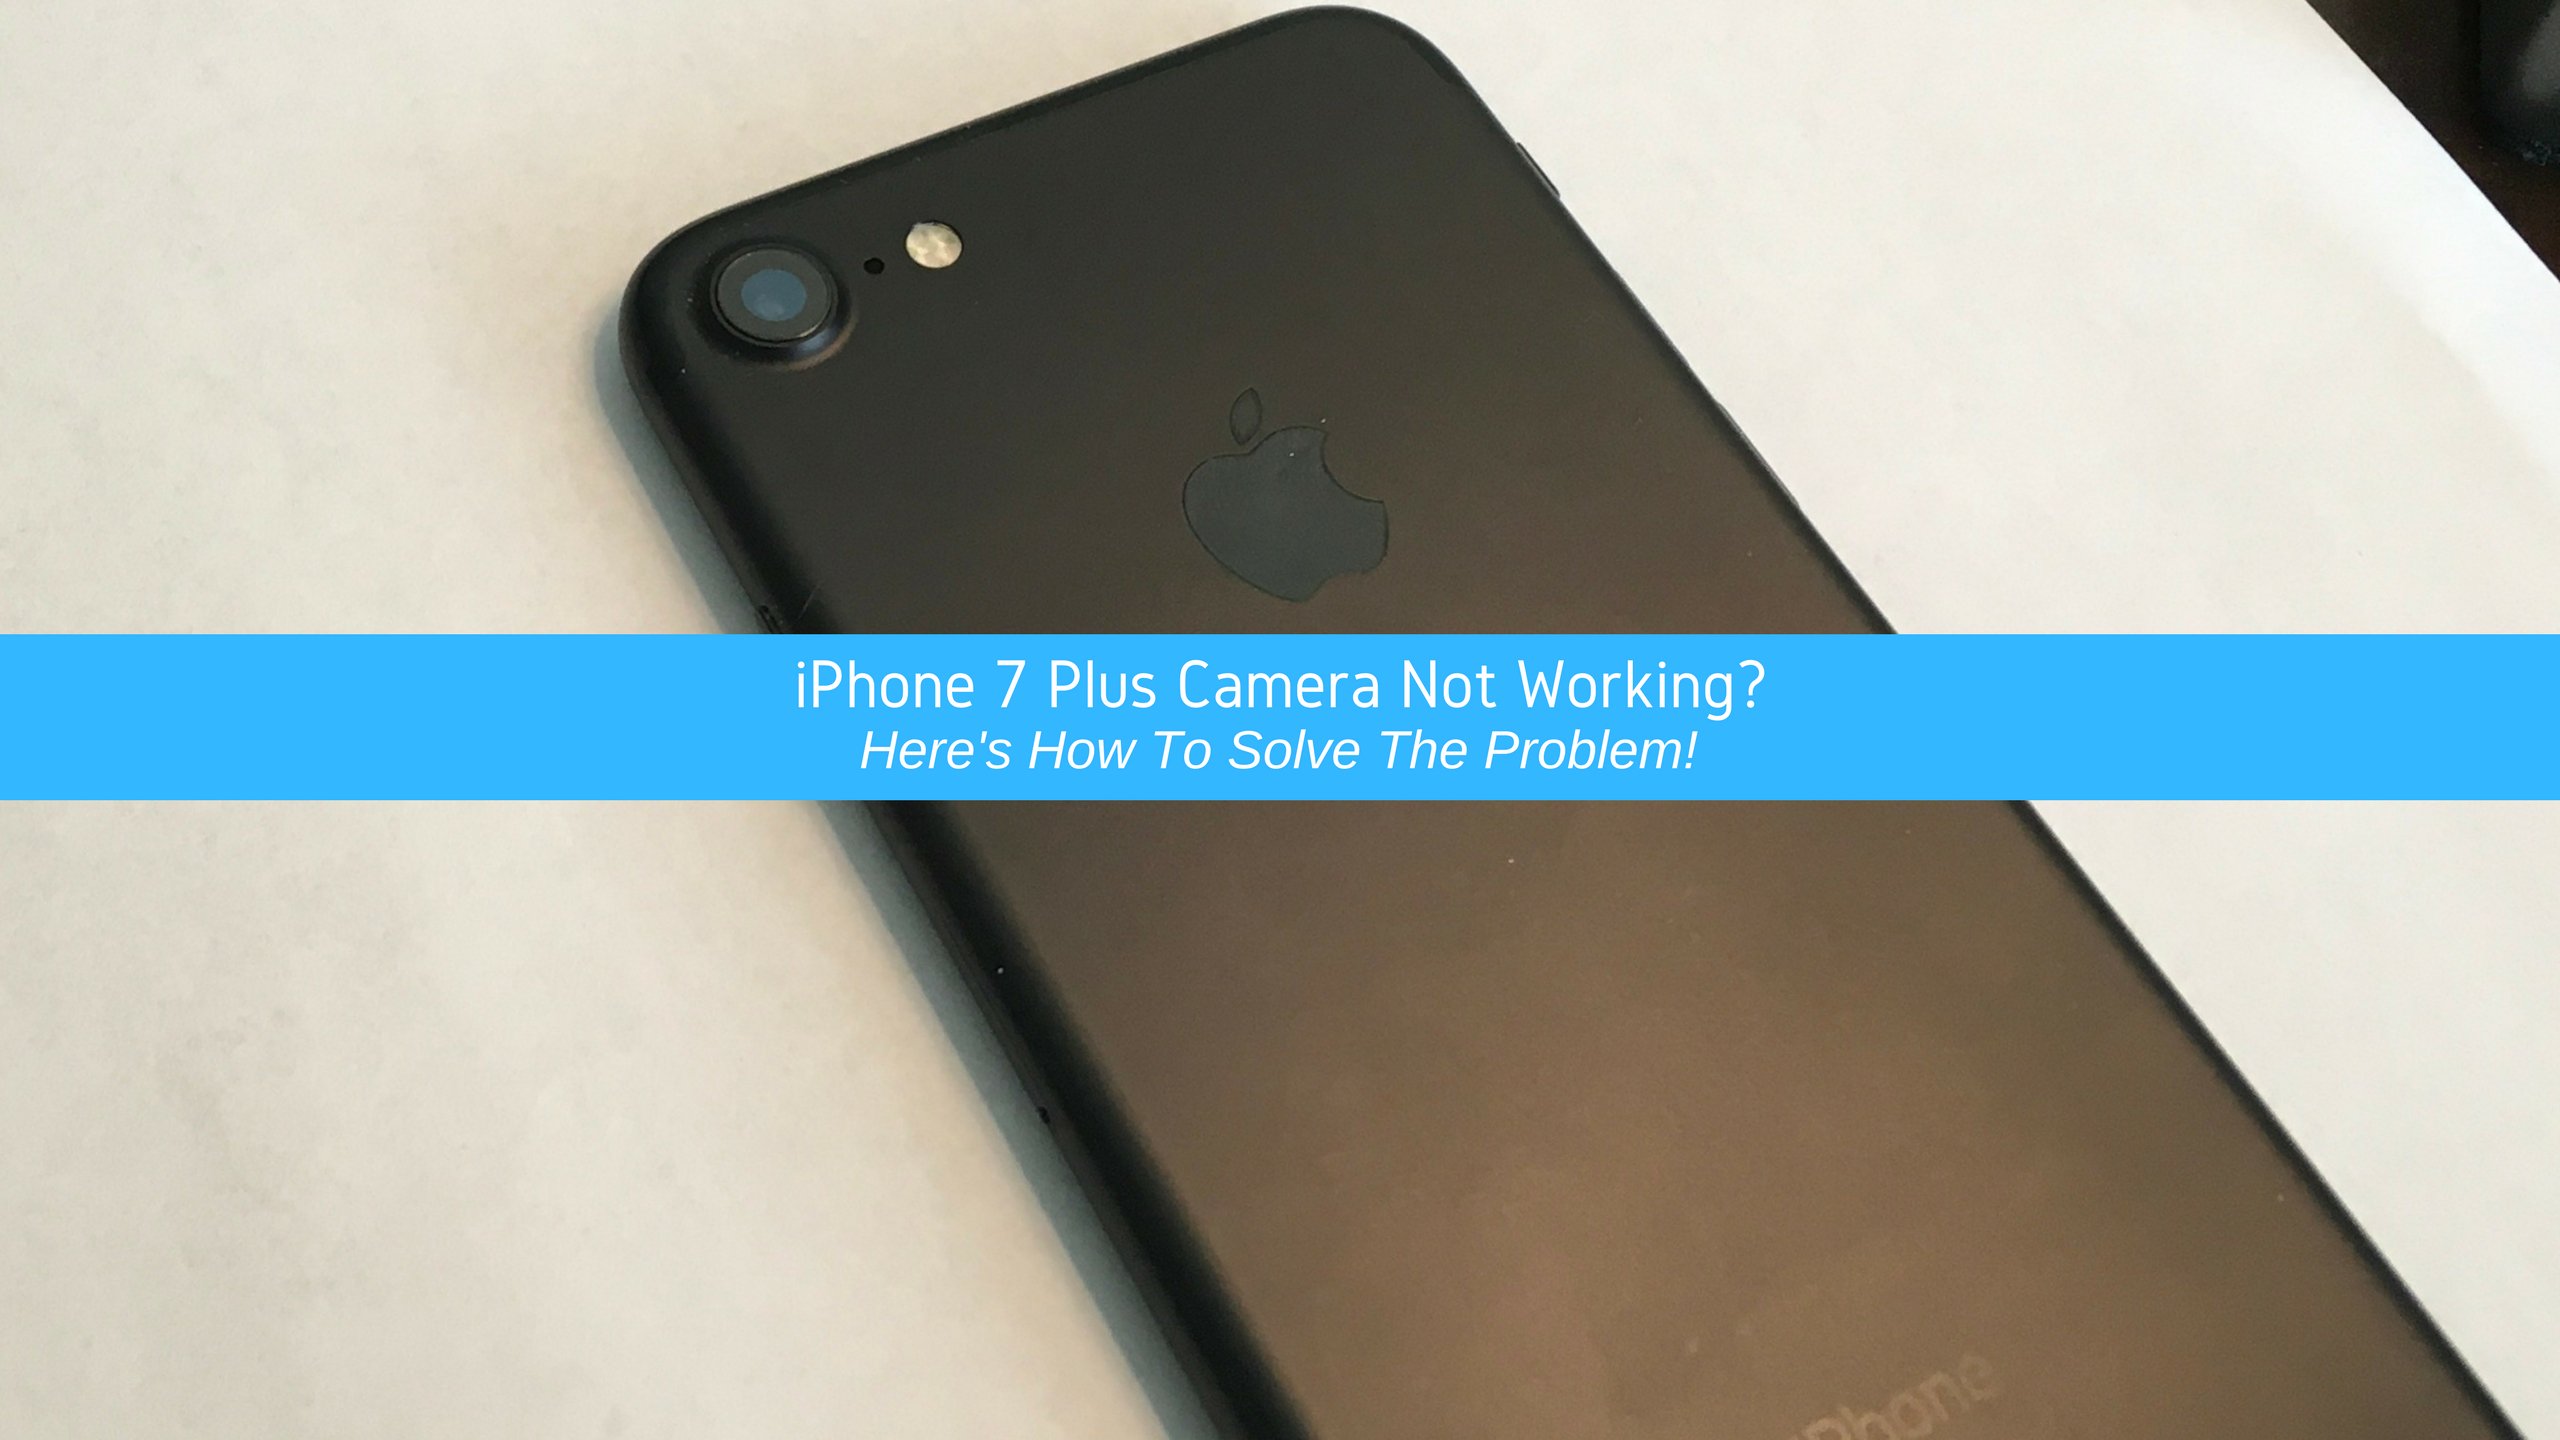 iPhone 7 Plus Camera Not Working? Here's How To Solve The Problem!